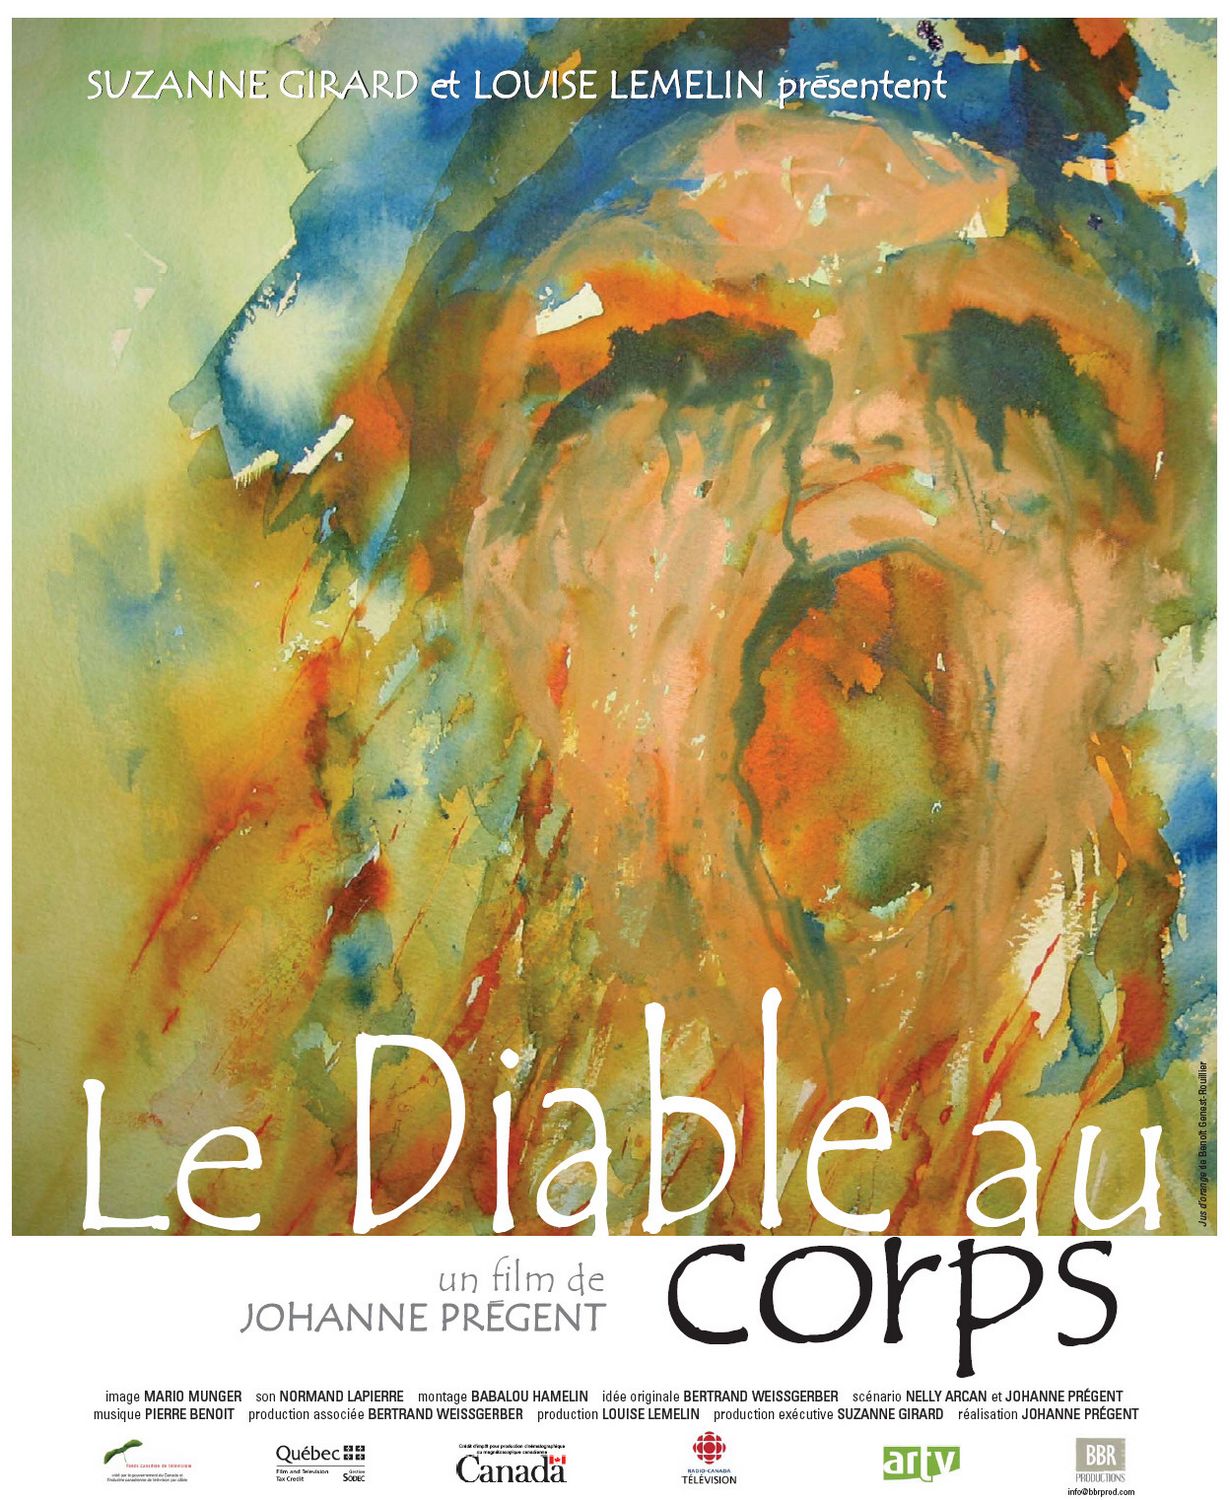 Extra Large Movie Poster Image for Diable au corps, Le 